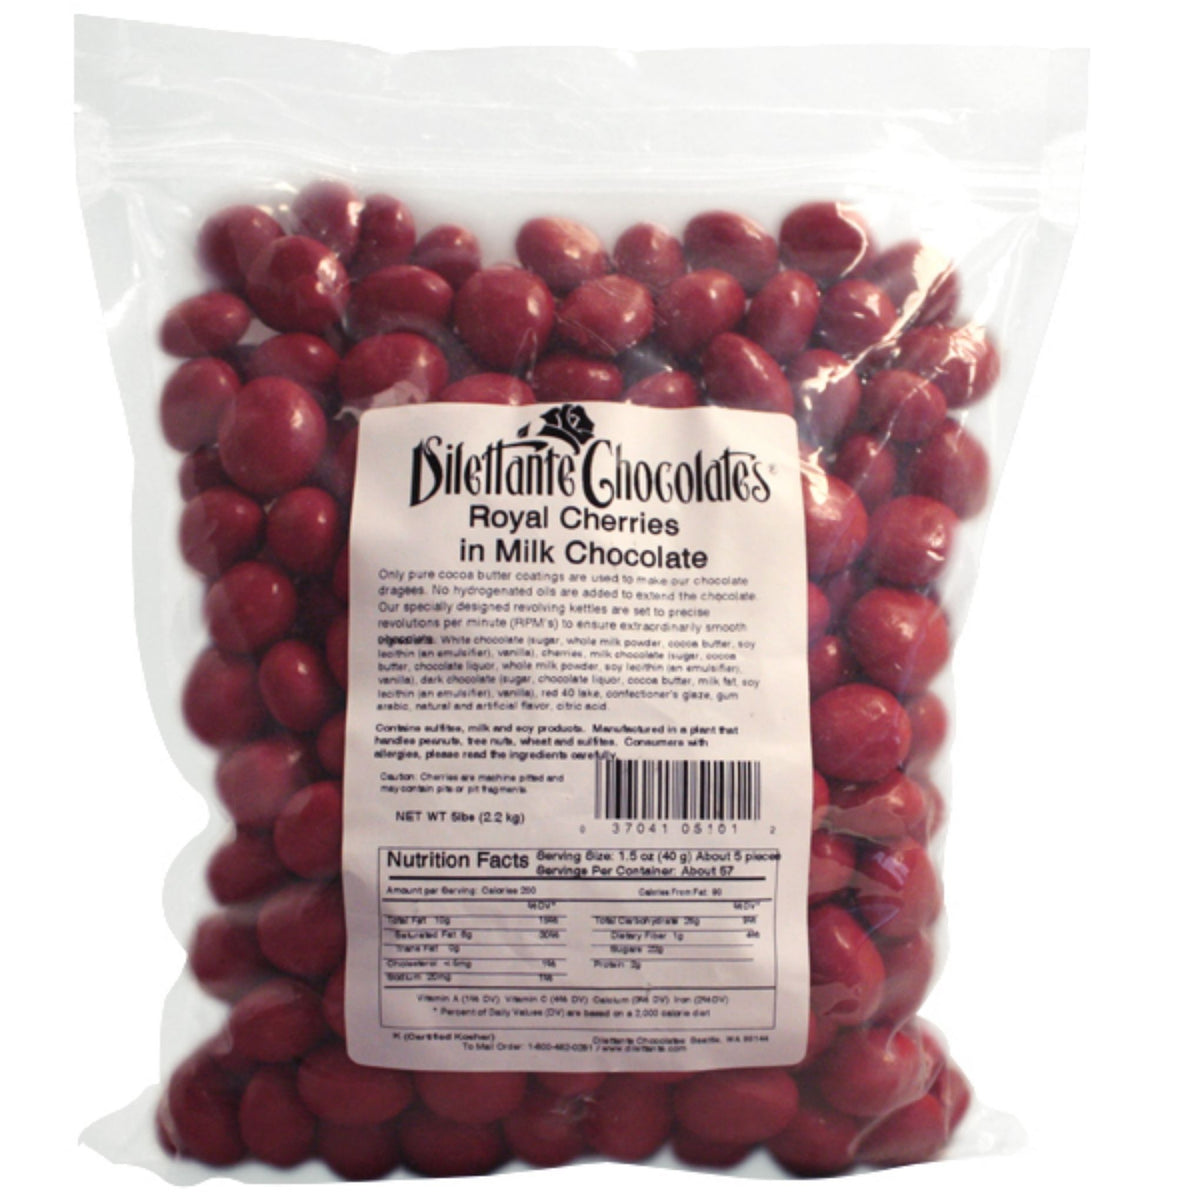 Dilettante Chocolates Royal Cherries in Milk Chocolate and Colored to a Vibrant Red Hue